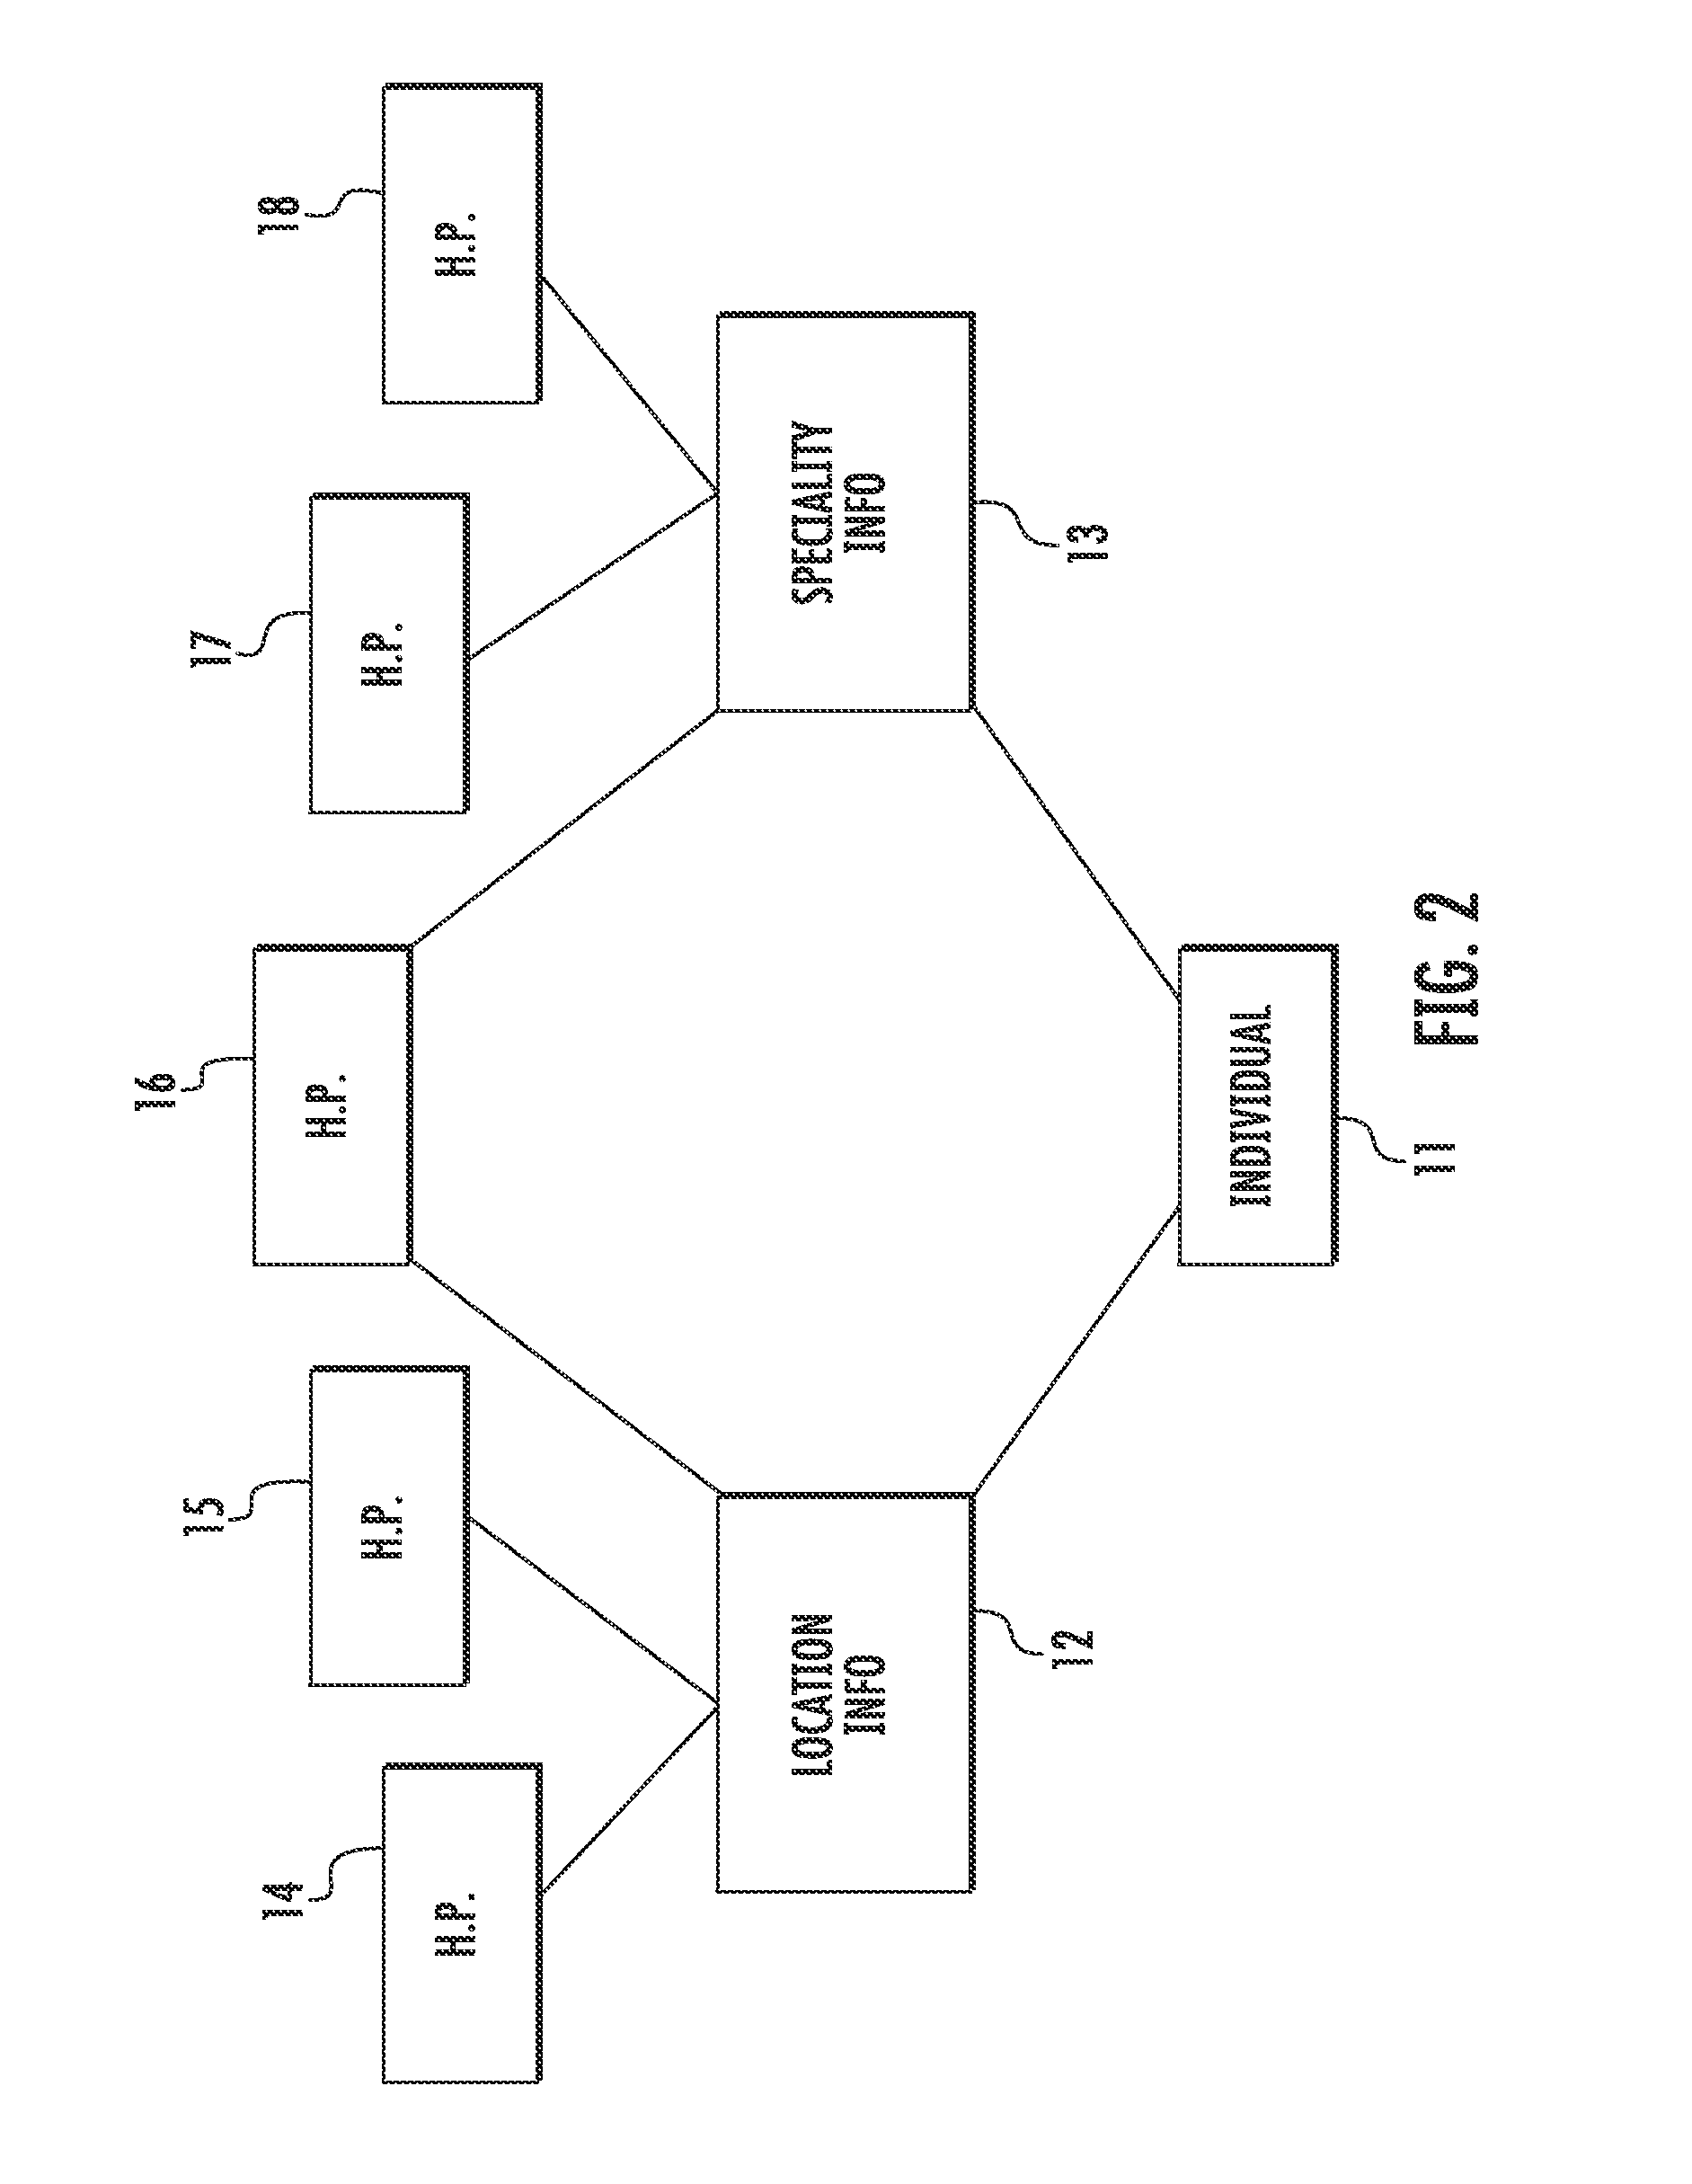 Medical professional appointment scheduling and payment system and method